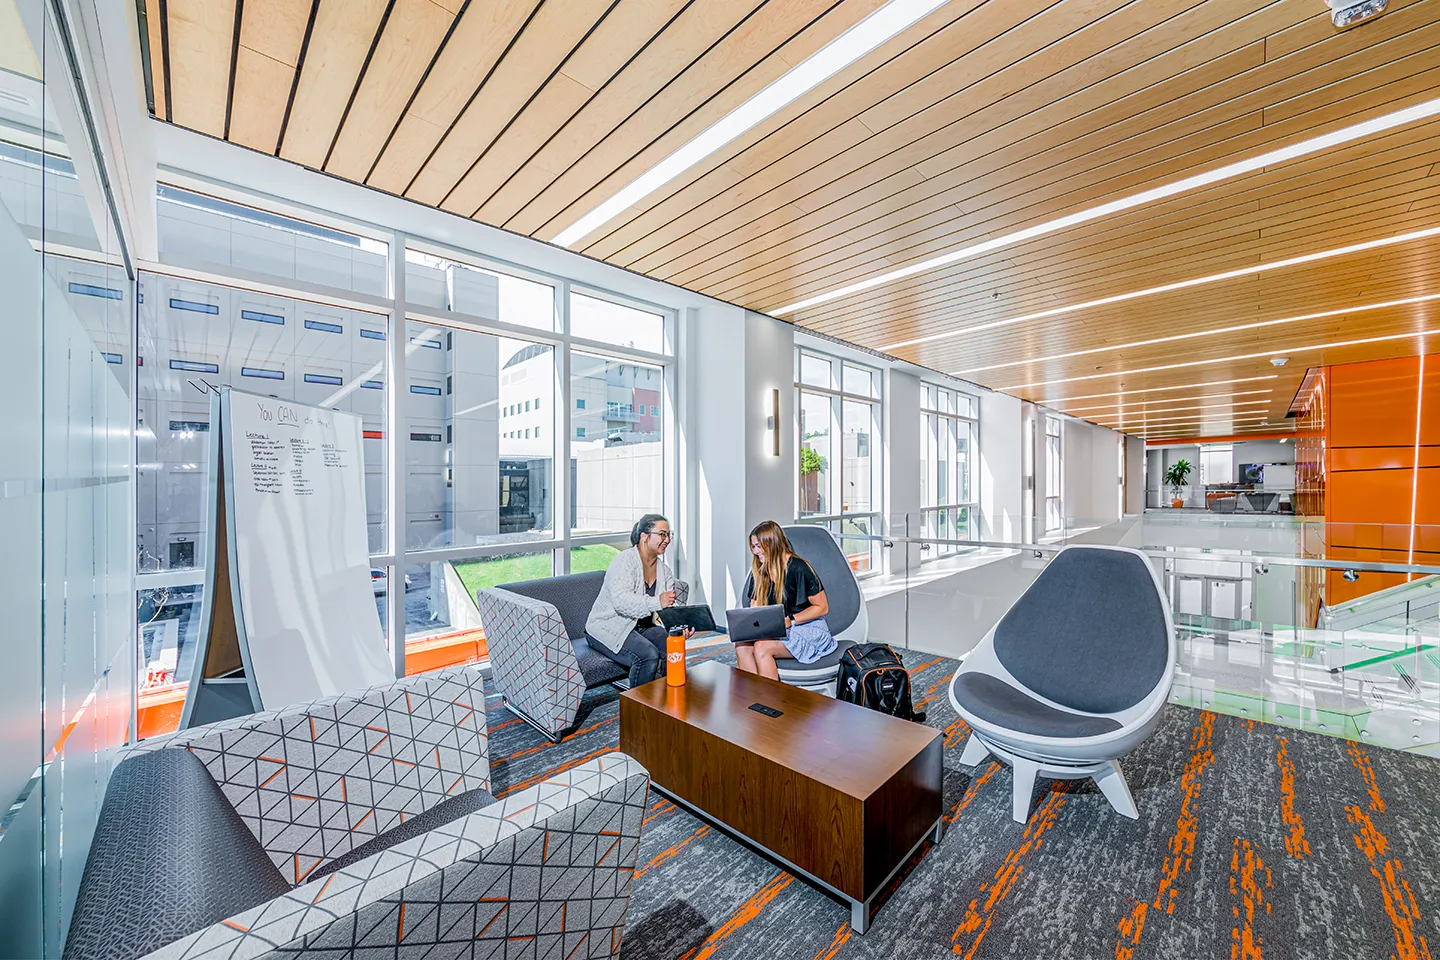 Comfortable pocketed spaces for study and collaboration are found throughout the North Hall Academic Building, taking advantage of natural light harvested from the interior lobby using a multi-floor clerestory design.